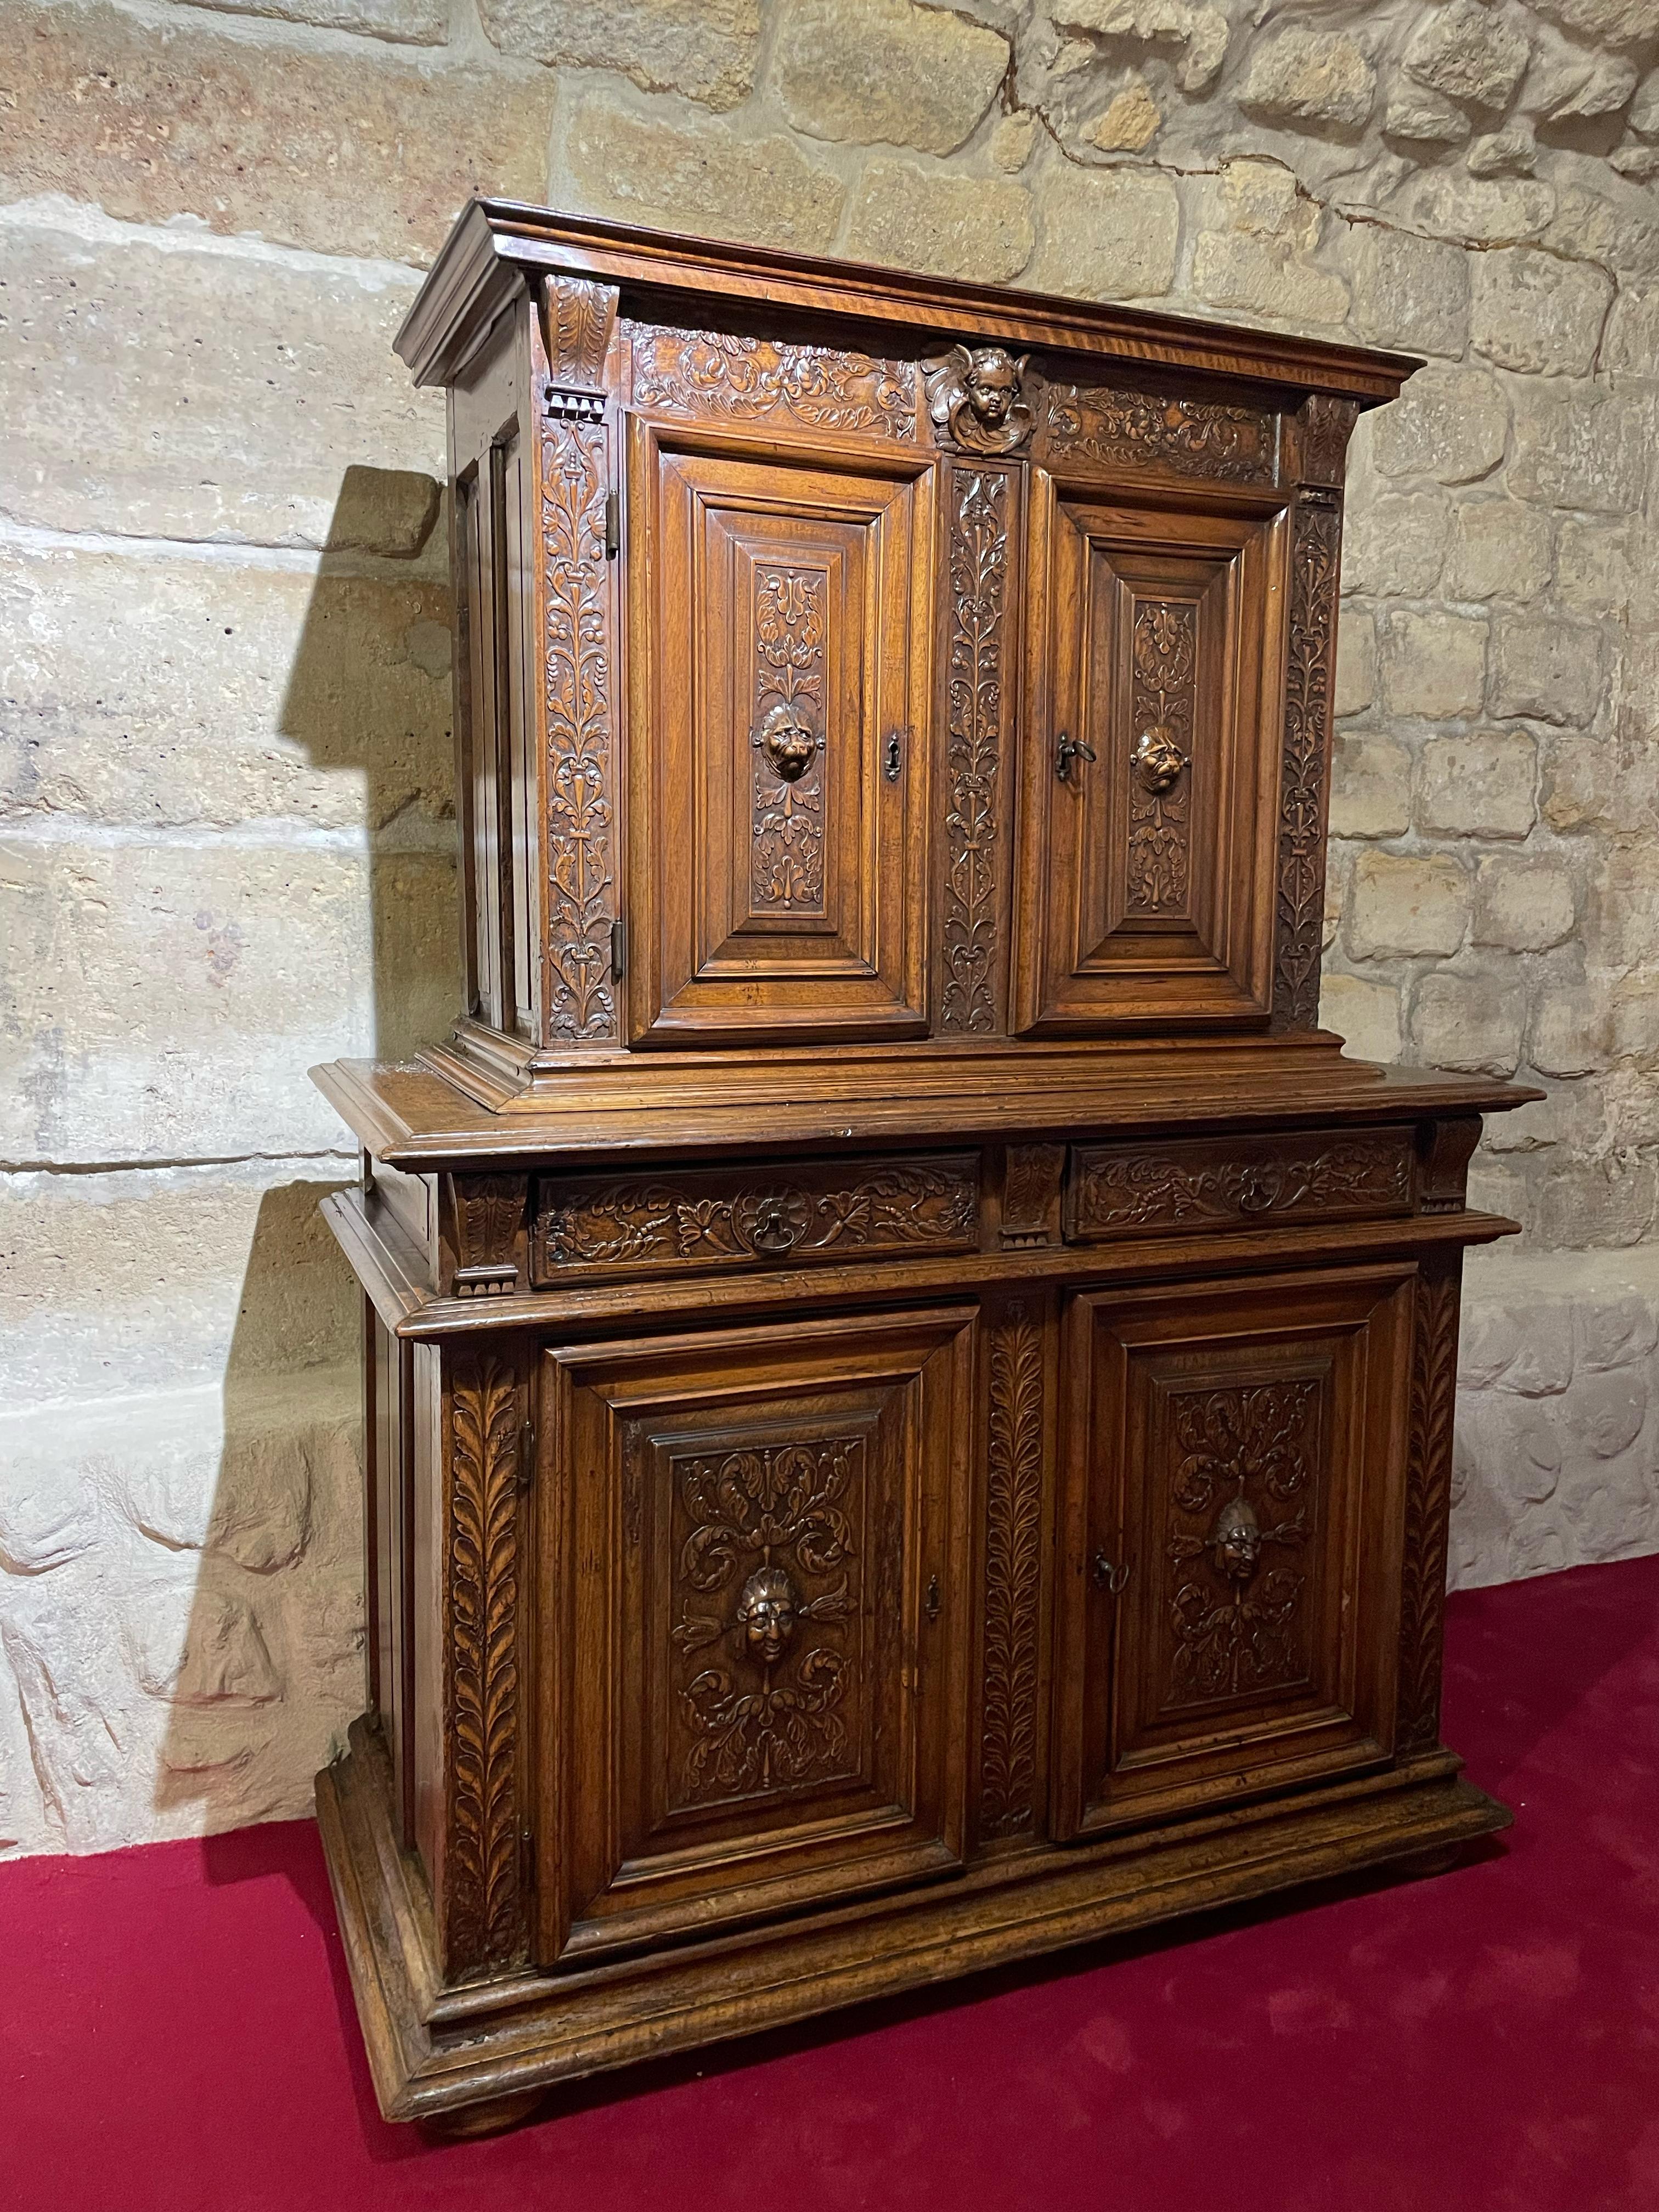 Small renaissance cabinet

ORIGIN : FRANCE
PERIOD : END OF THE 16th CENTURY

Measures: height: 167 cm
length: 123 cm
depth: 58 cm 



This small two-part unit with harmonious proportions opens with four front leaves and two belt drawers.